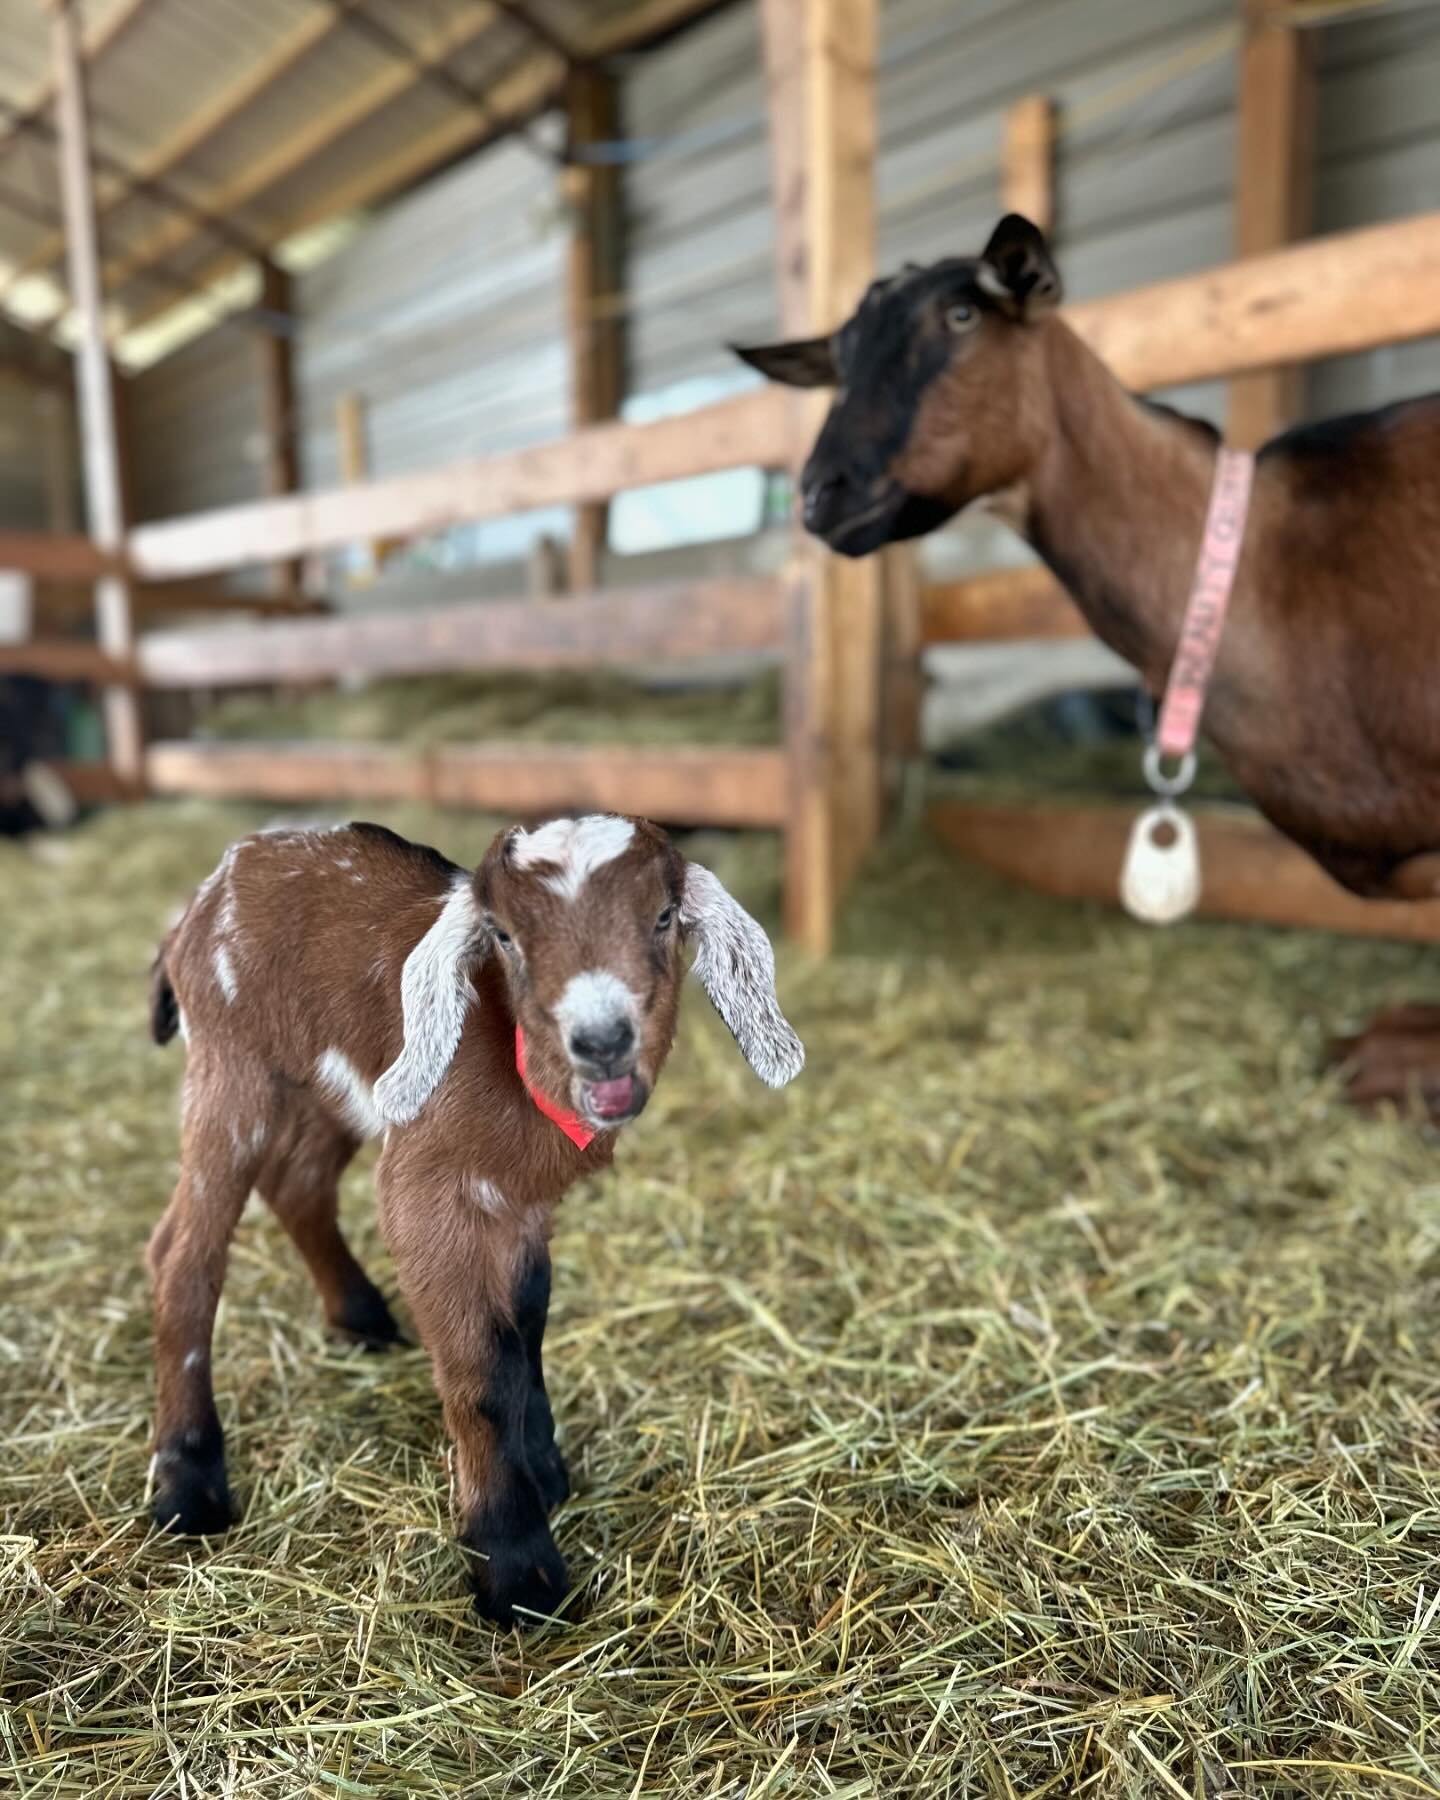 Happy Mother&rsquo;s Day to all the mamas, mother figures and goat mamas out there! 🩷. We have finished kidding and still have some sweet baby goats left for sale. May be your mom wants a fuzzy baby goat for Mother&rsquo;s Day. ❤️🩷DM Dani at boxcar